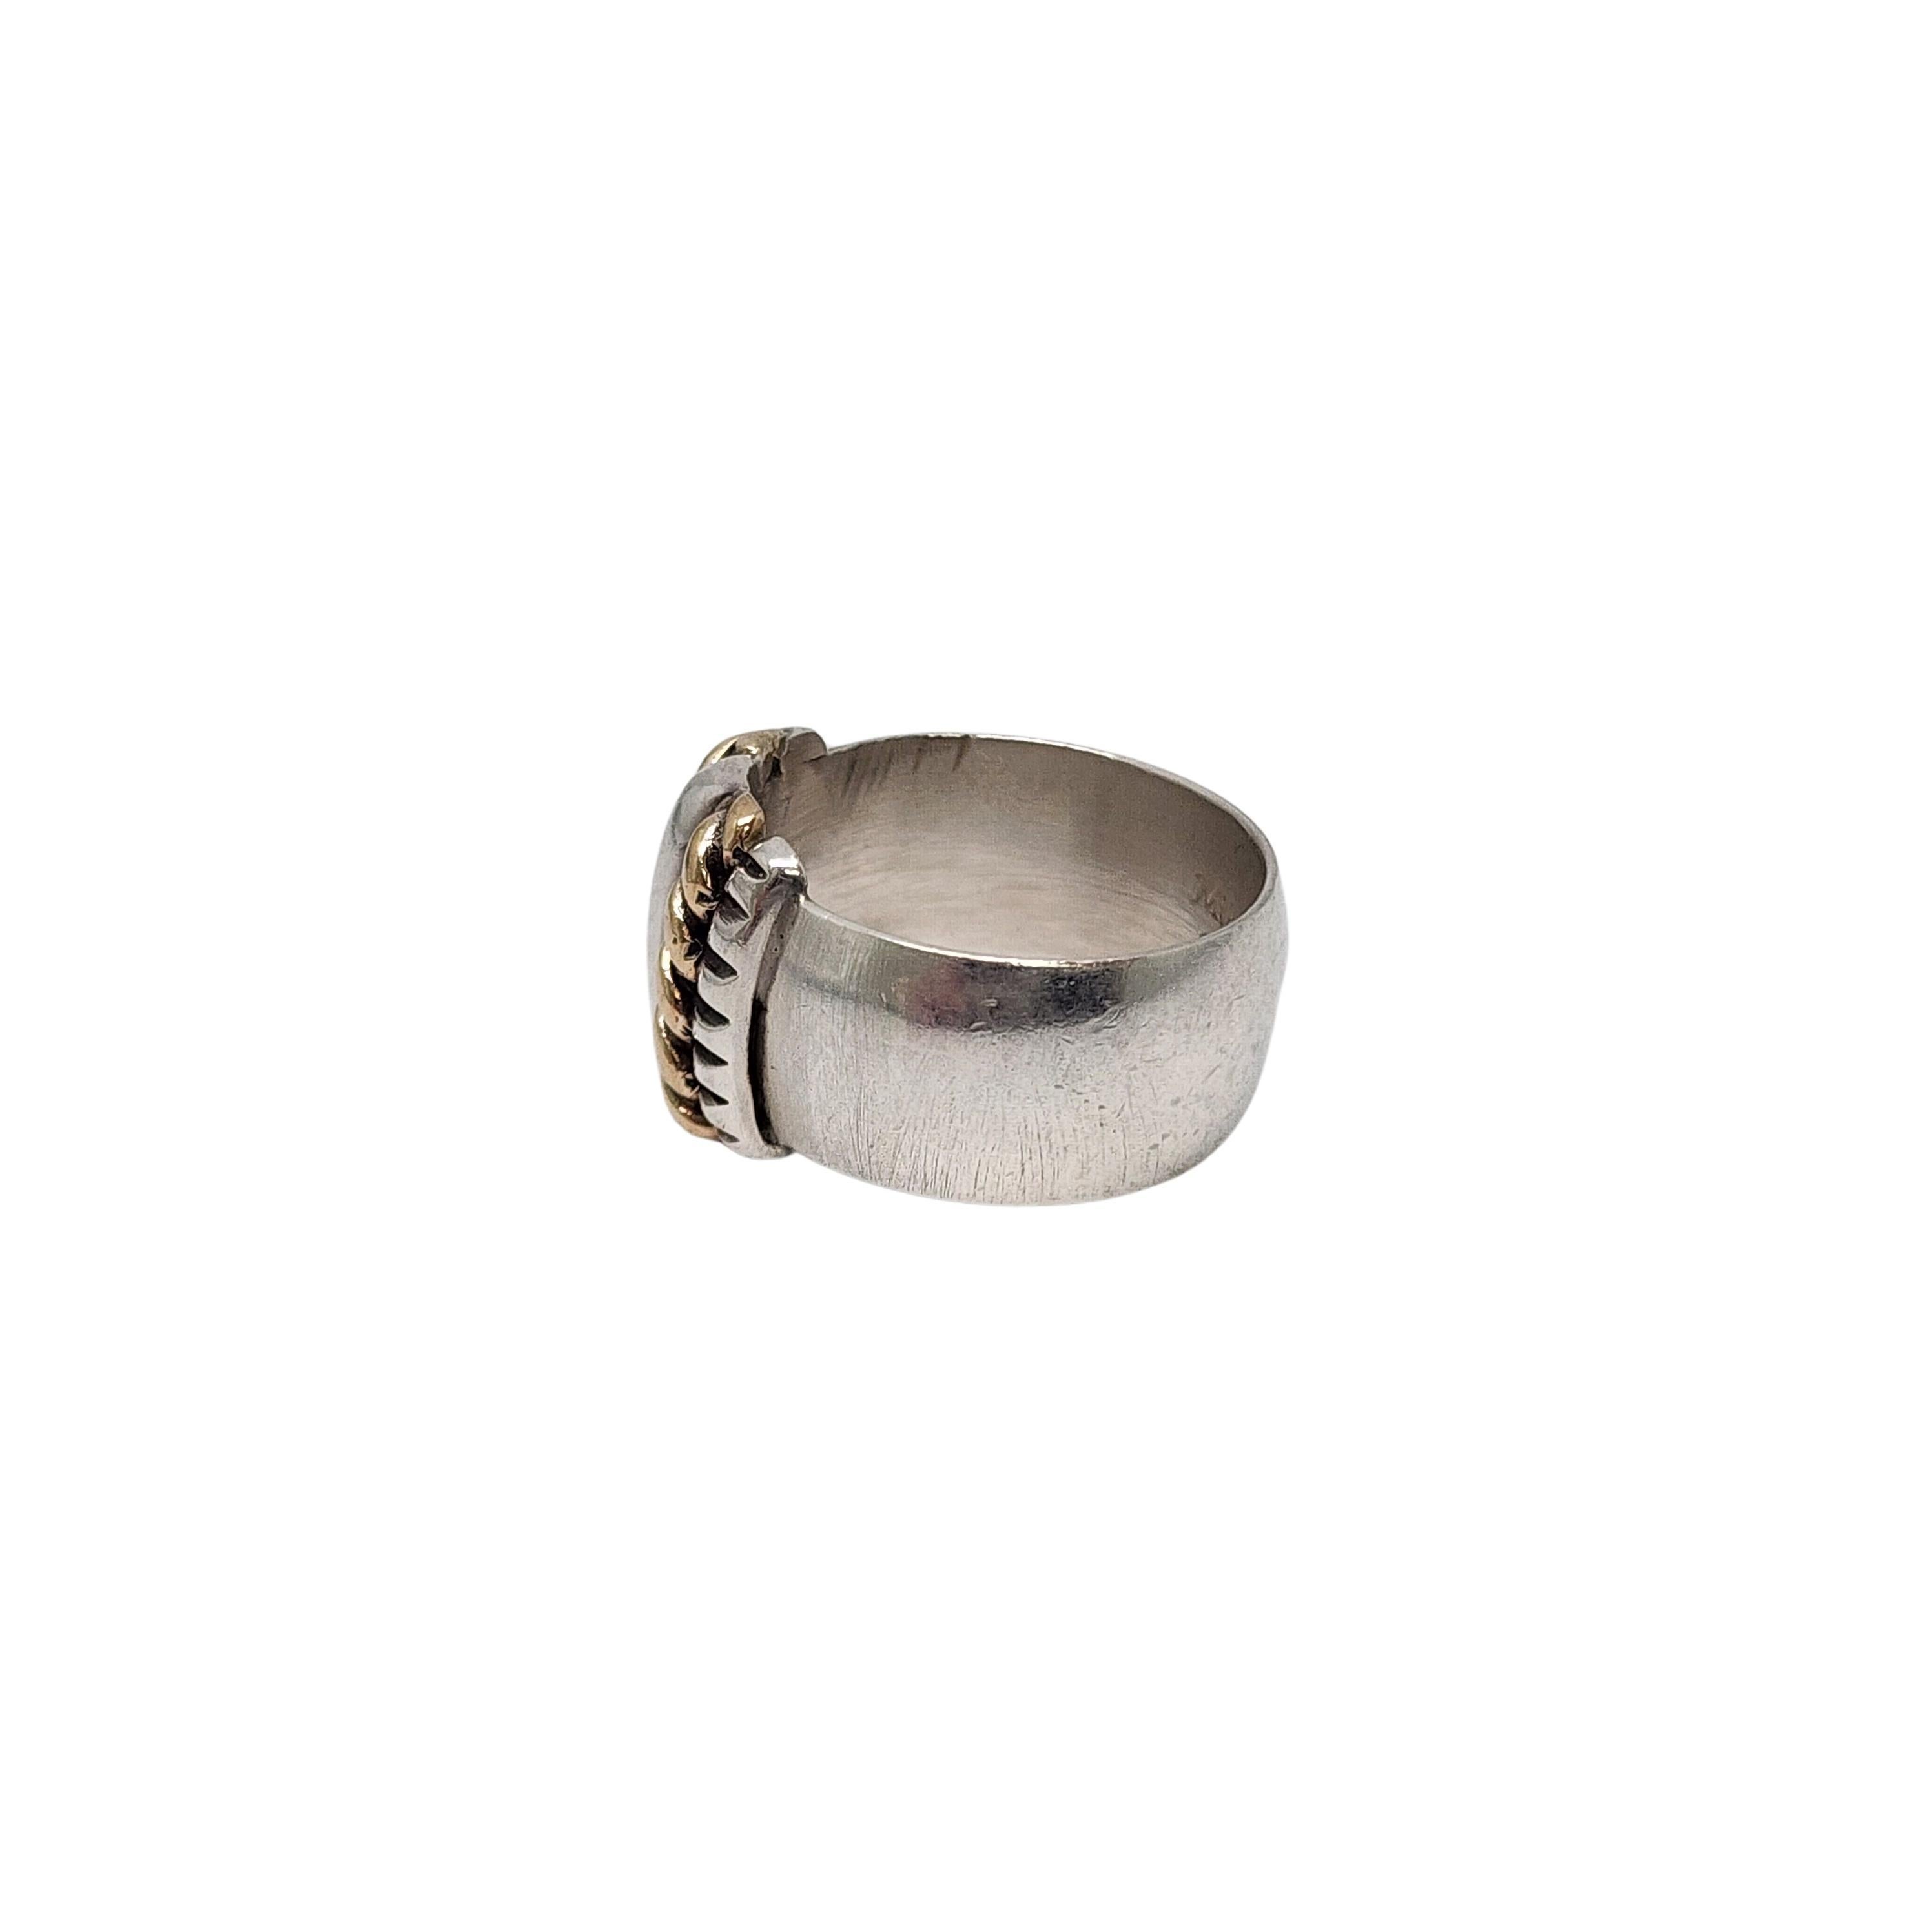 Sterling silver and 14k yellow gold accent band ring by Native American artisan Mike Smith.

Size 6 1/2

This wide sterling silver band features a yellow gold rope accent.

Weighs approx 8.5g, 5.5dwt

Measures approx 1/2